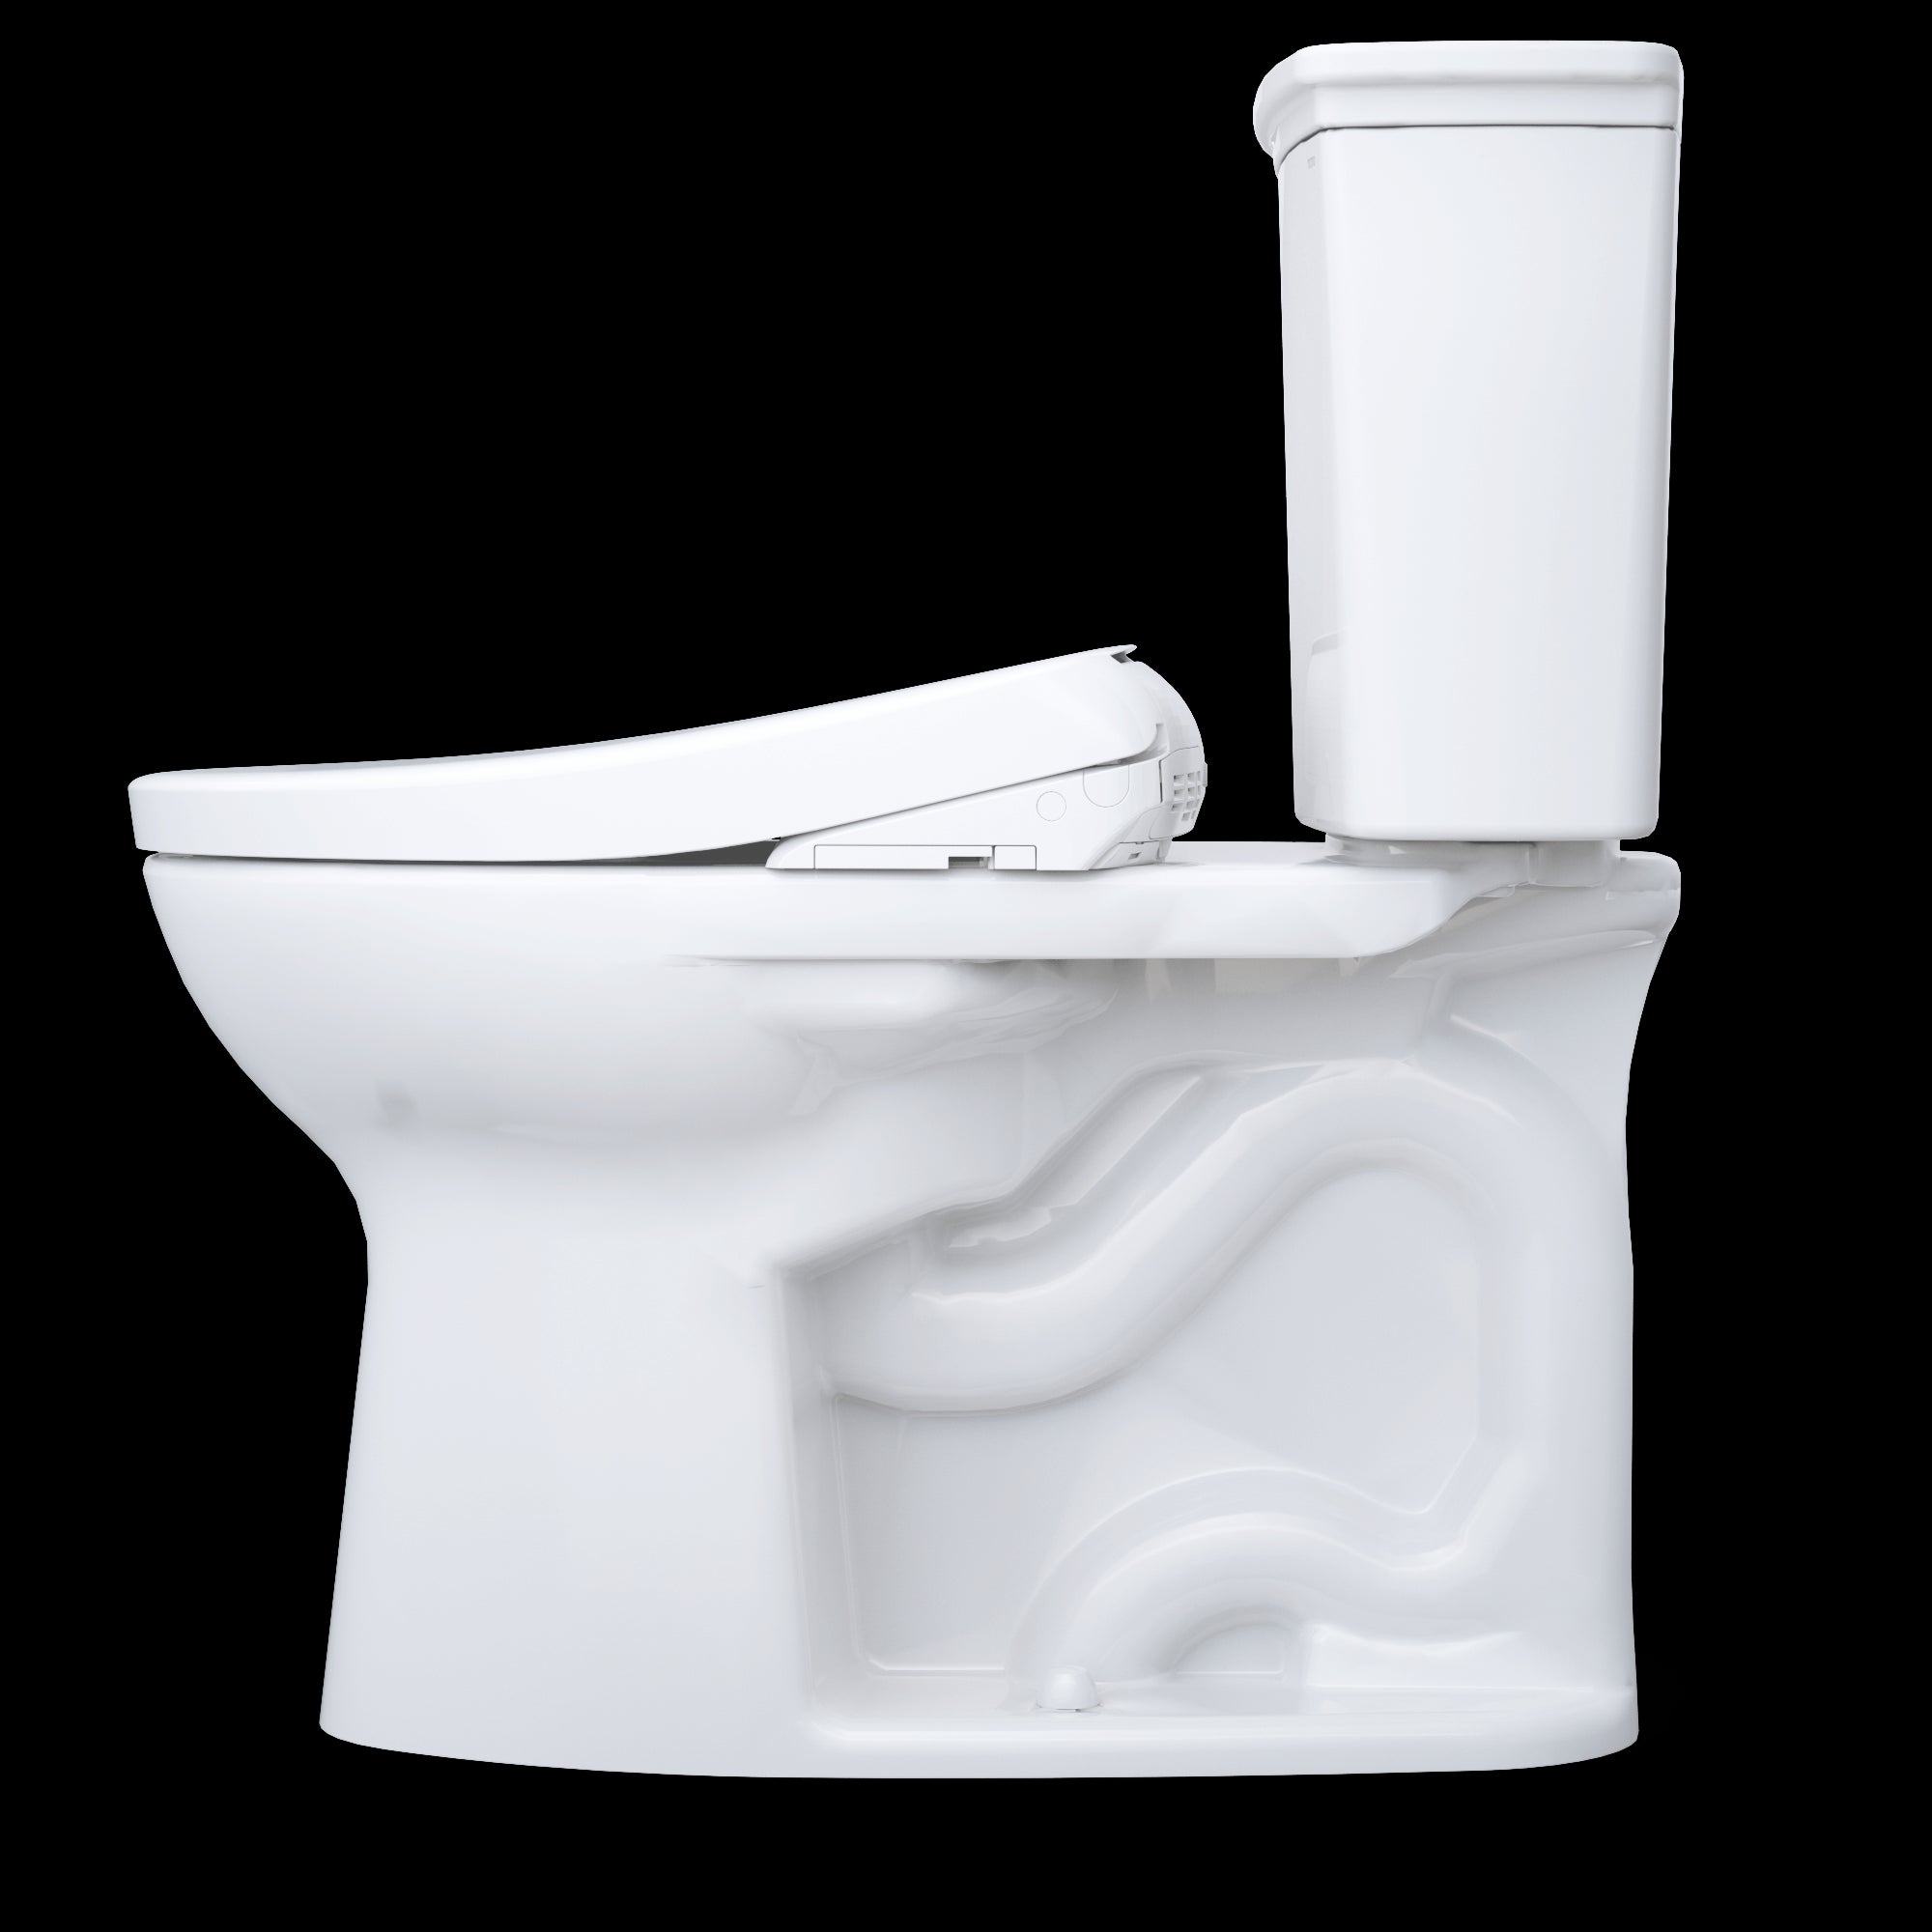 TOTO Drake 1.28 GPF with S7A Contemporary Bidet Seat | MW7864736CEFG#01